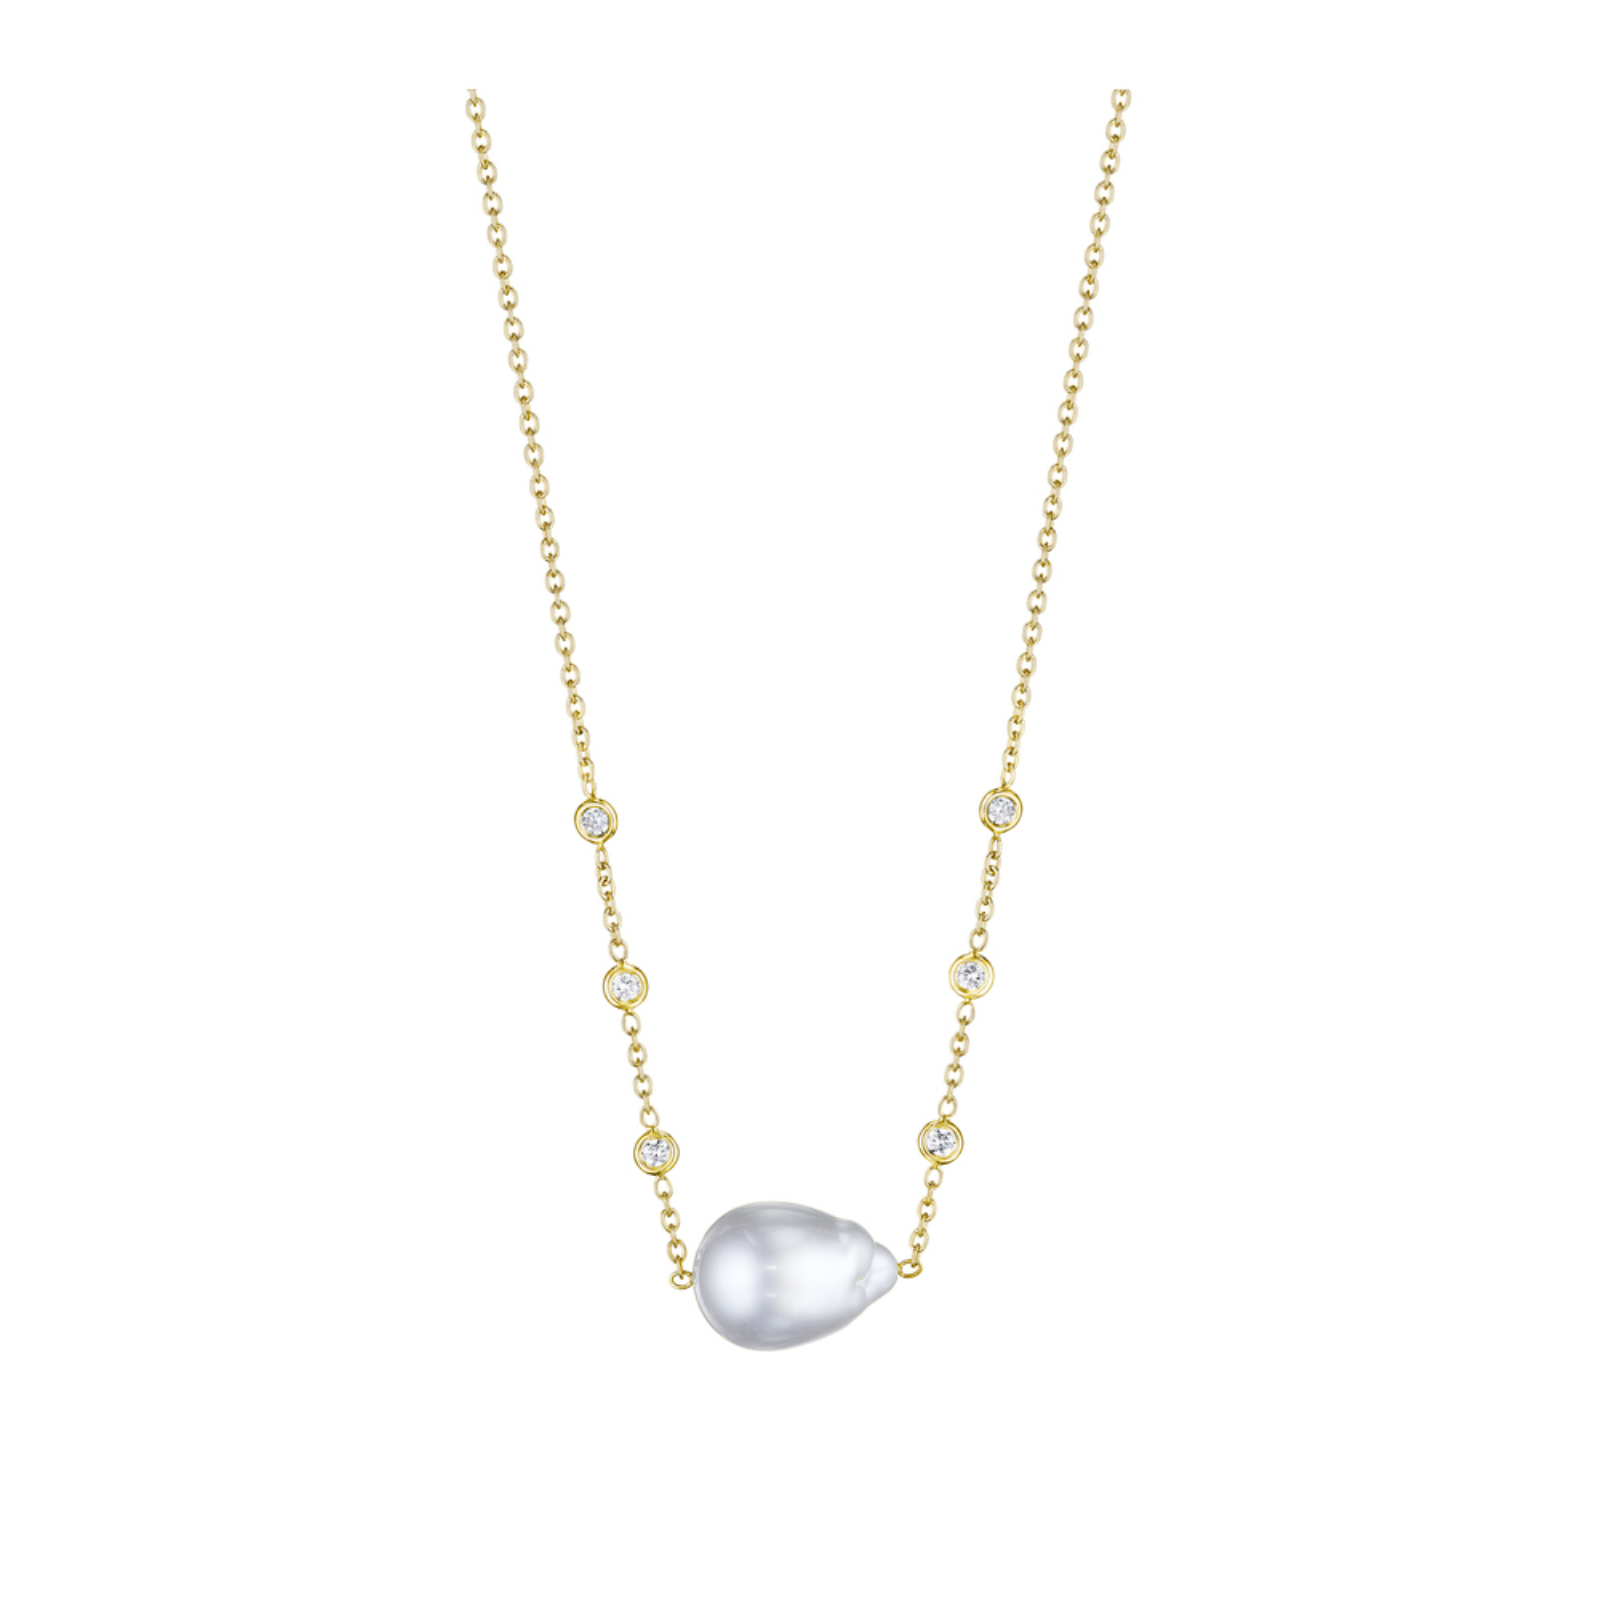 Gold Diamond and South Sea Pearl Necklace - JNECK00638